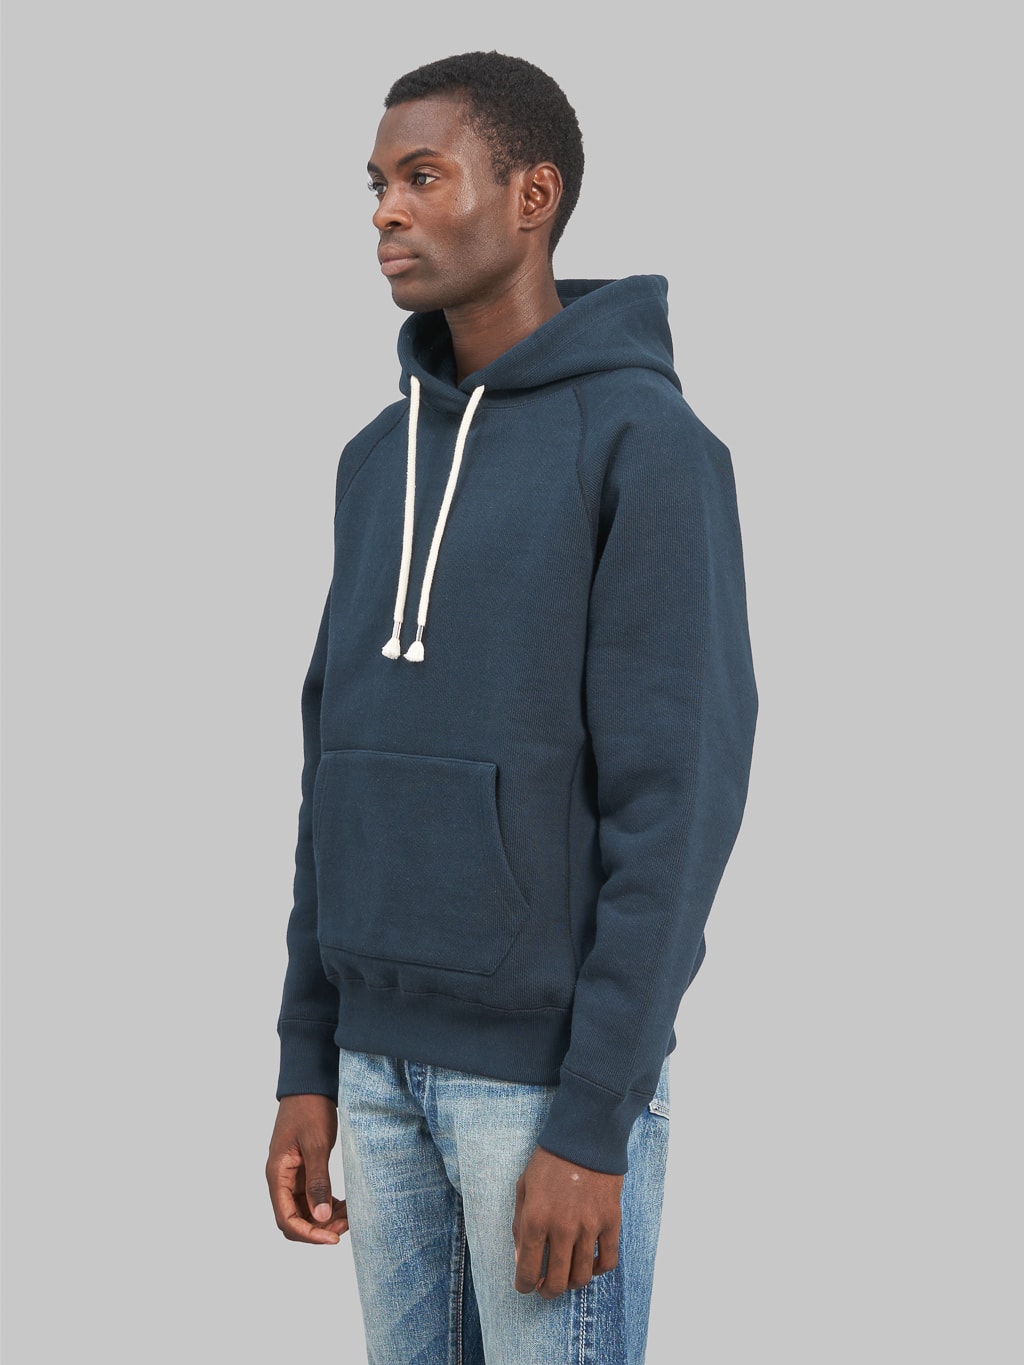 Wonder Looper Pullover Hoodie Double Heavyweight French Terry navy athletic side look